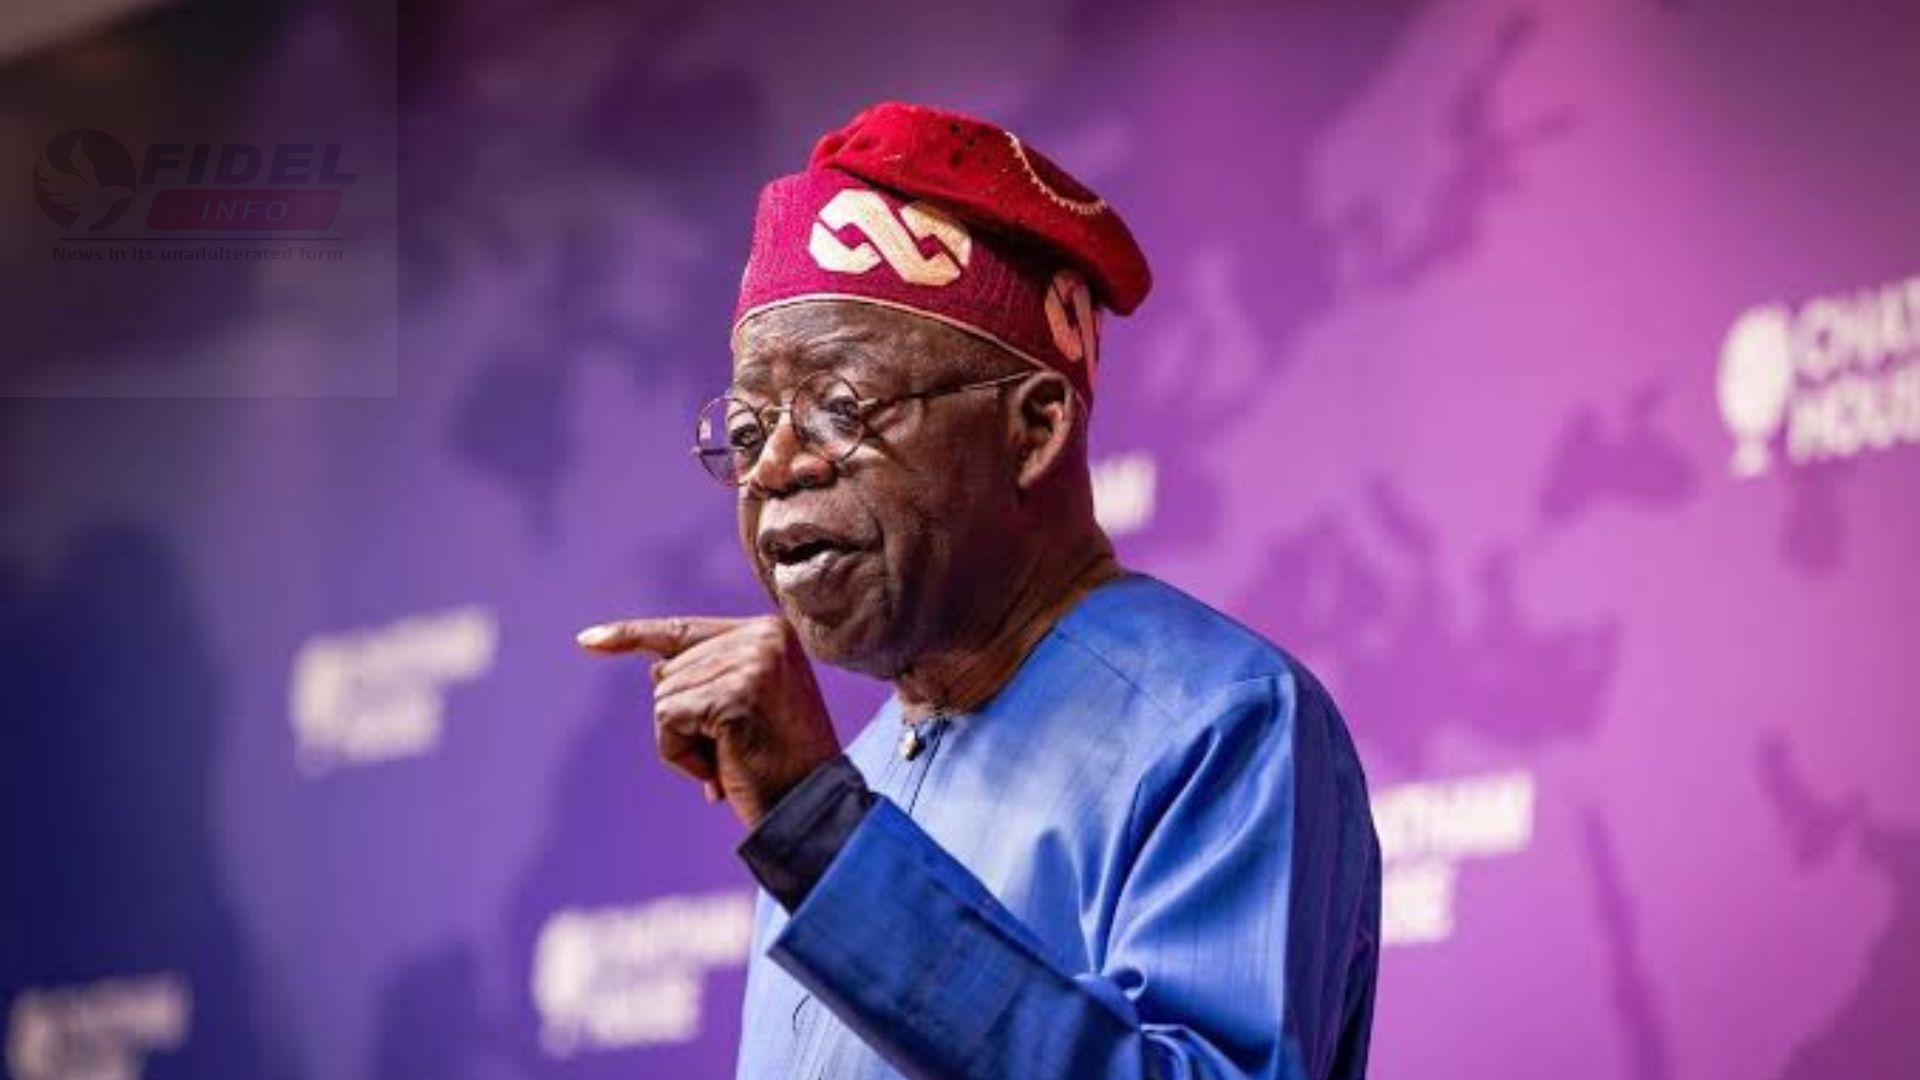 Every trip I have taken since I assumed office is for Nigeria, says Tinubu